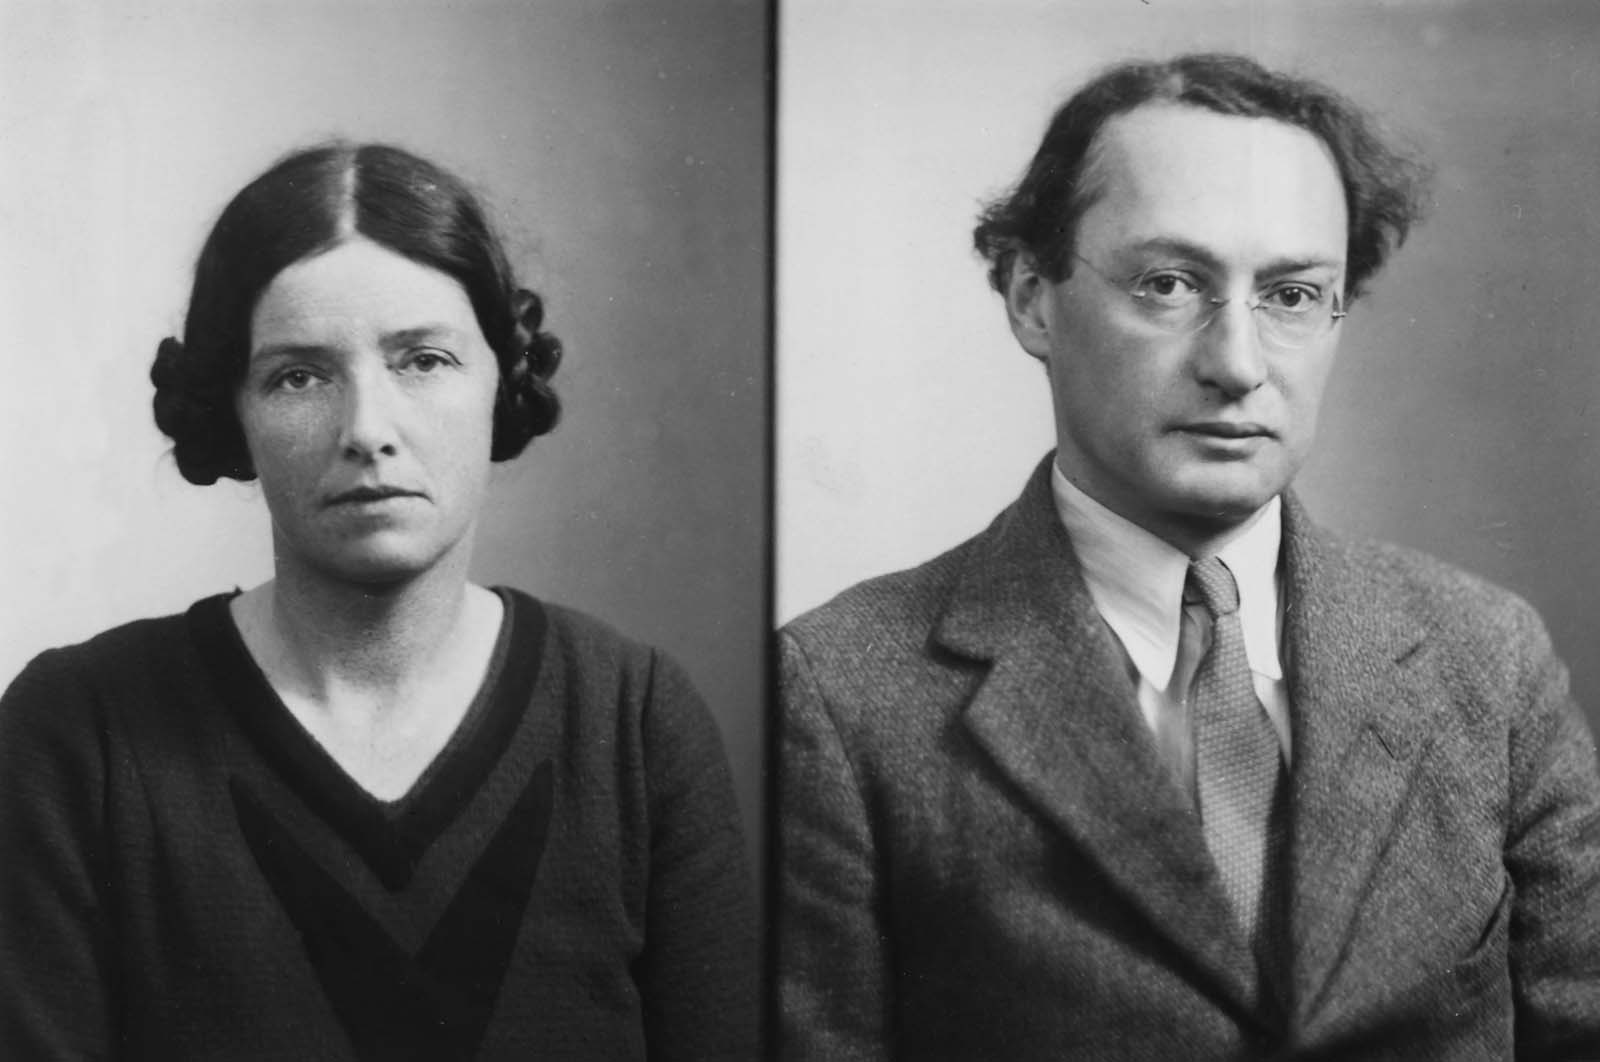 Passport photographs of Dorothy Pilley Richards and I. A. Richards, ca. 1920s–30s.